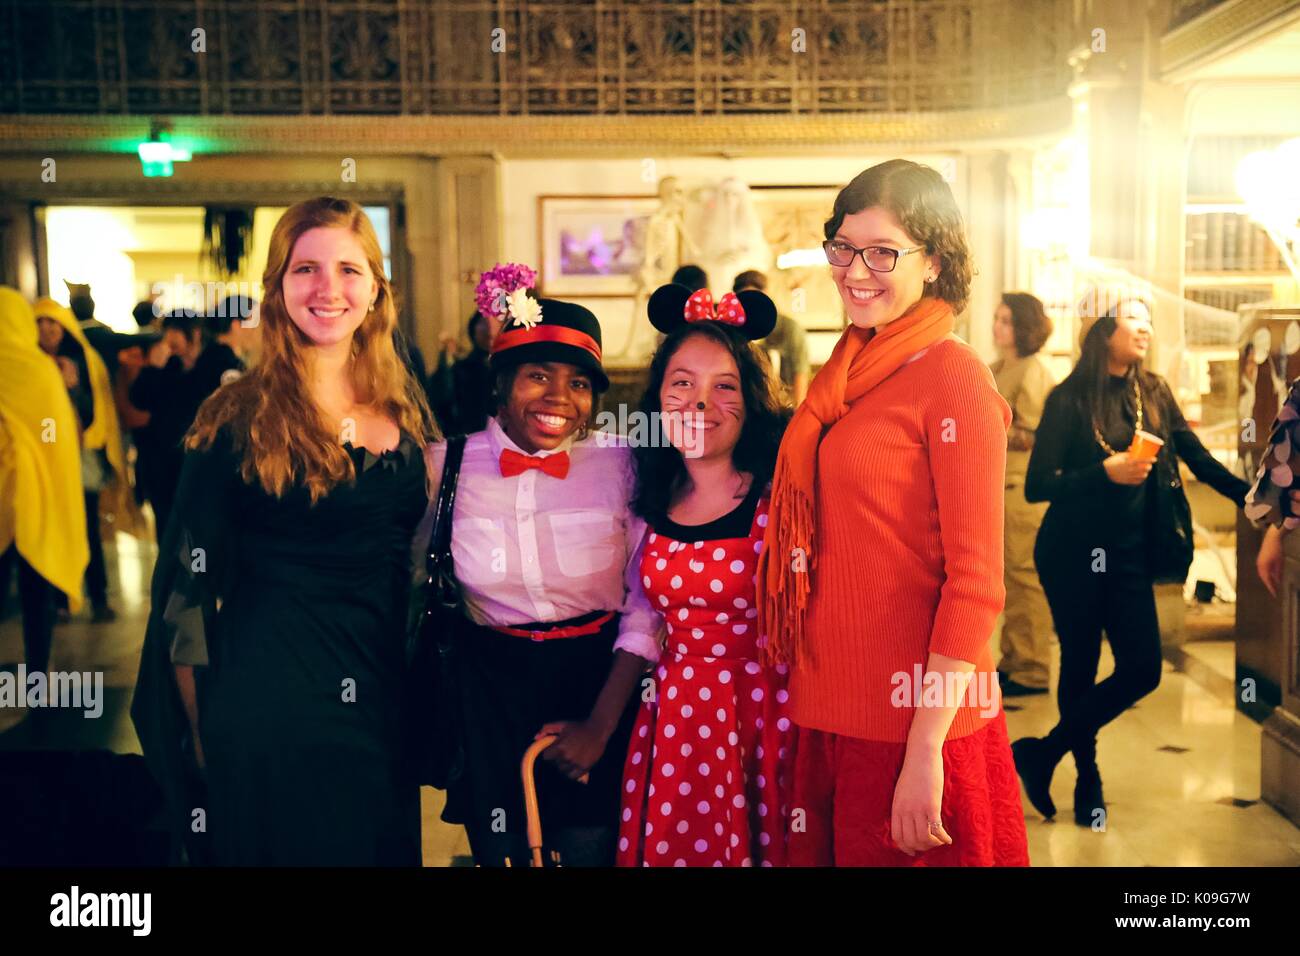 Four female college students are posing and smiling, the girl on the far left is wearing a black dress, the next girl is dressed as Mary Poppins and is holding an umbrella, the girl next to her is dressed as Minnie Mouse and the girl on the far right is dressed as a Wilma from Scooby Doo, 2015. Courtesy Eric Chen. Stock Photo